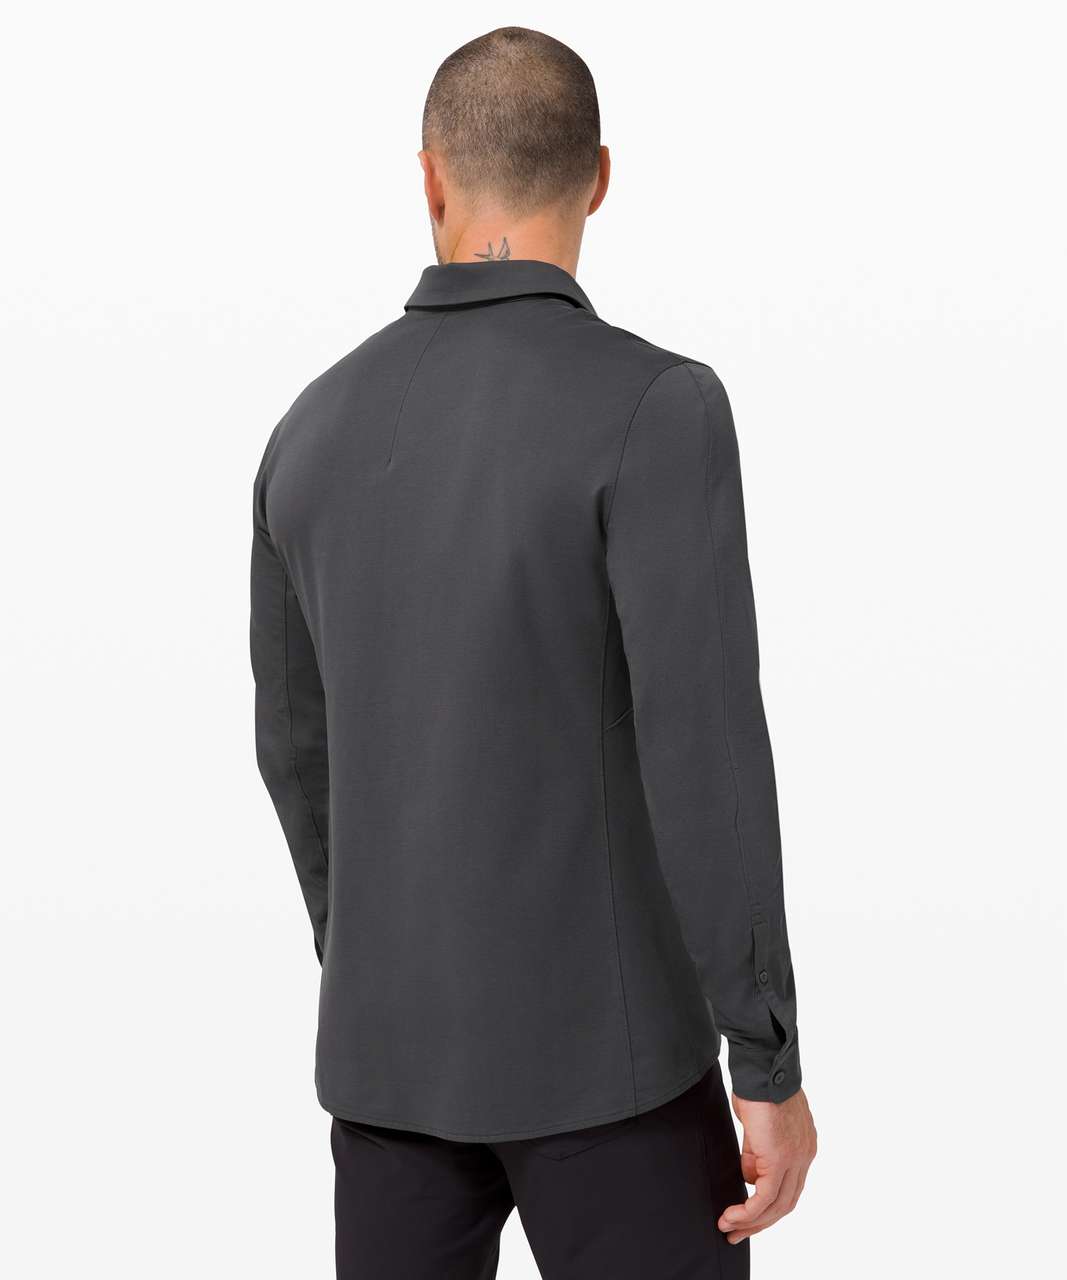 Lululemon Commission Long Sleeve Button Down *Qwick Oxford - Graphite Grey